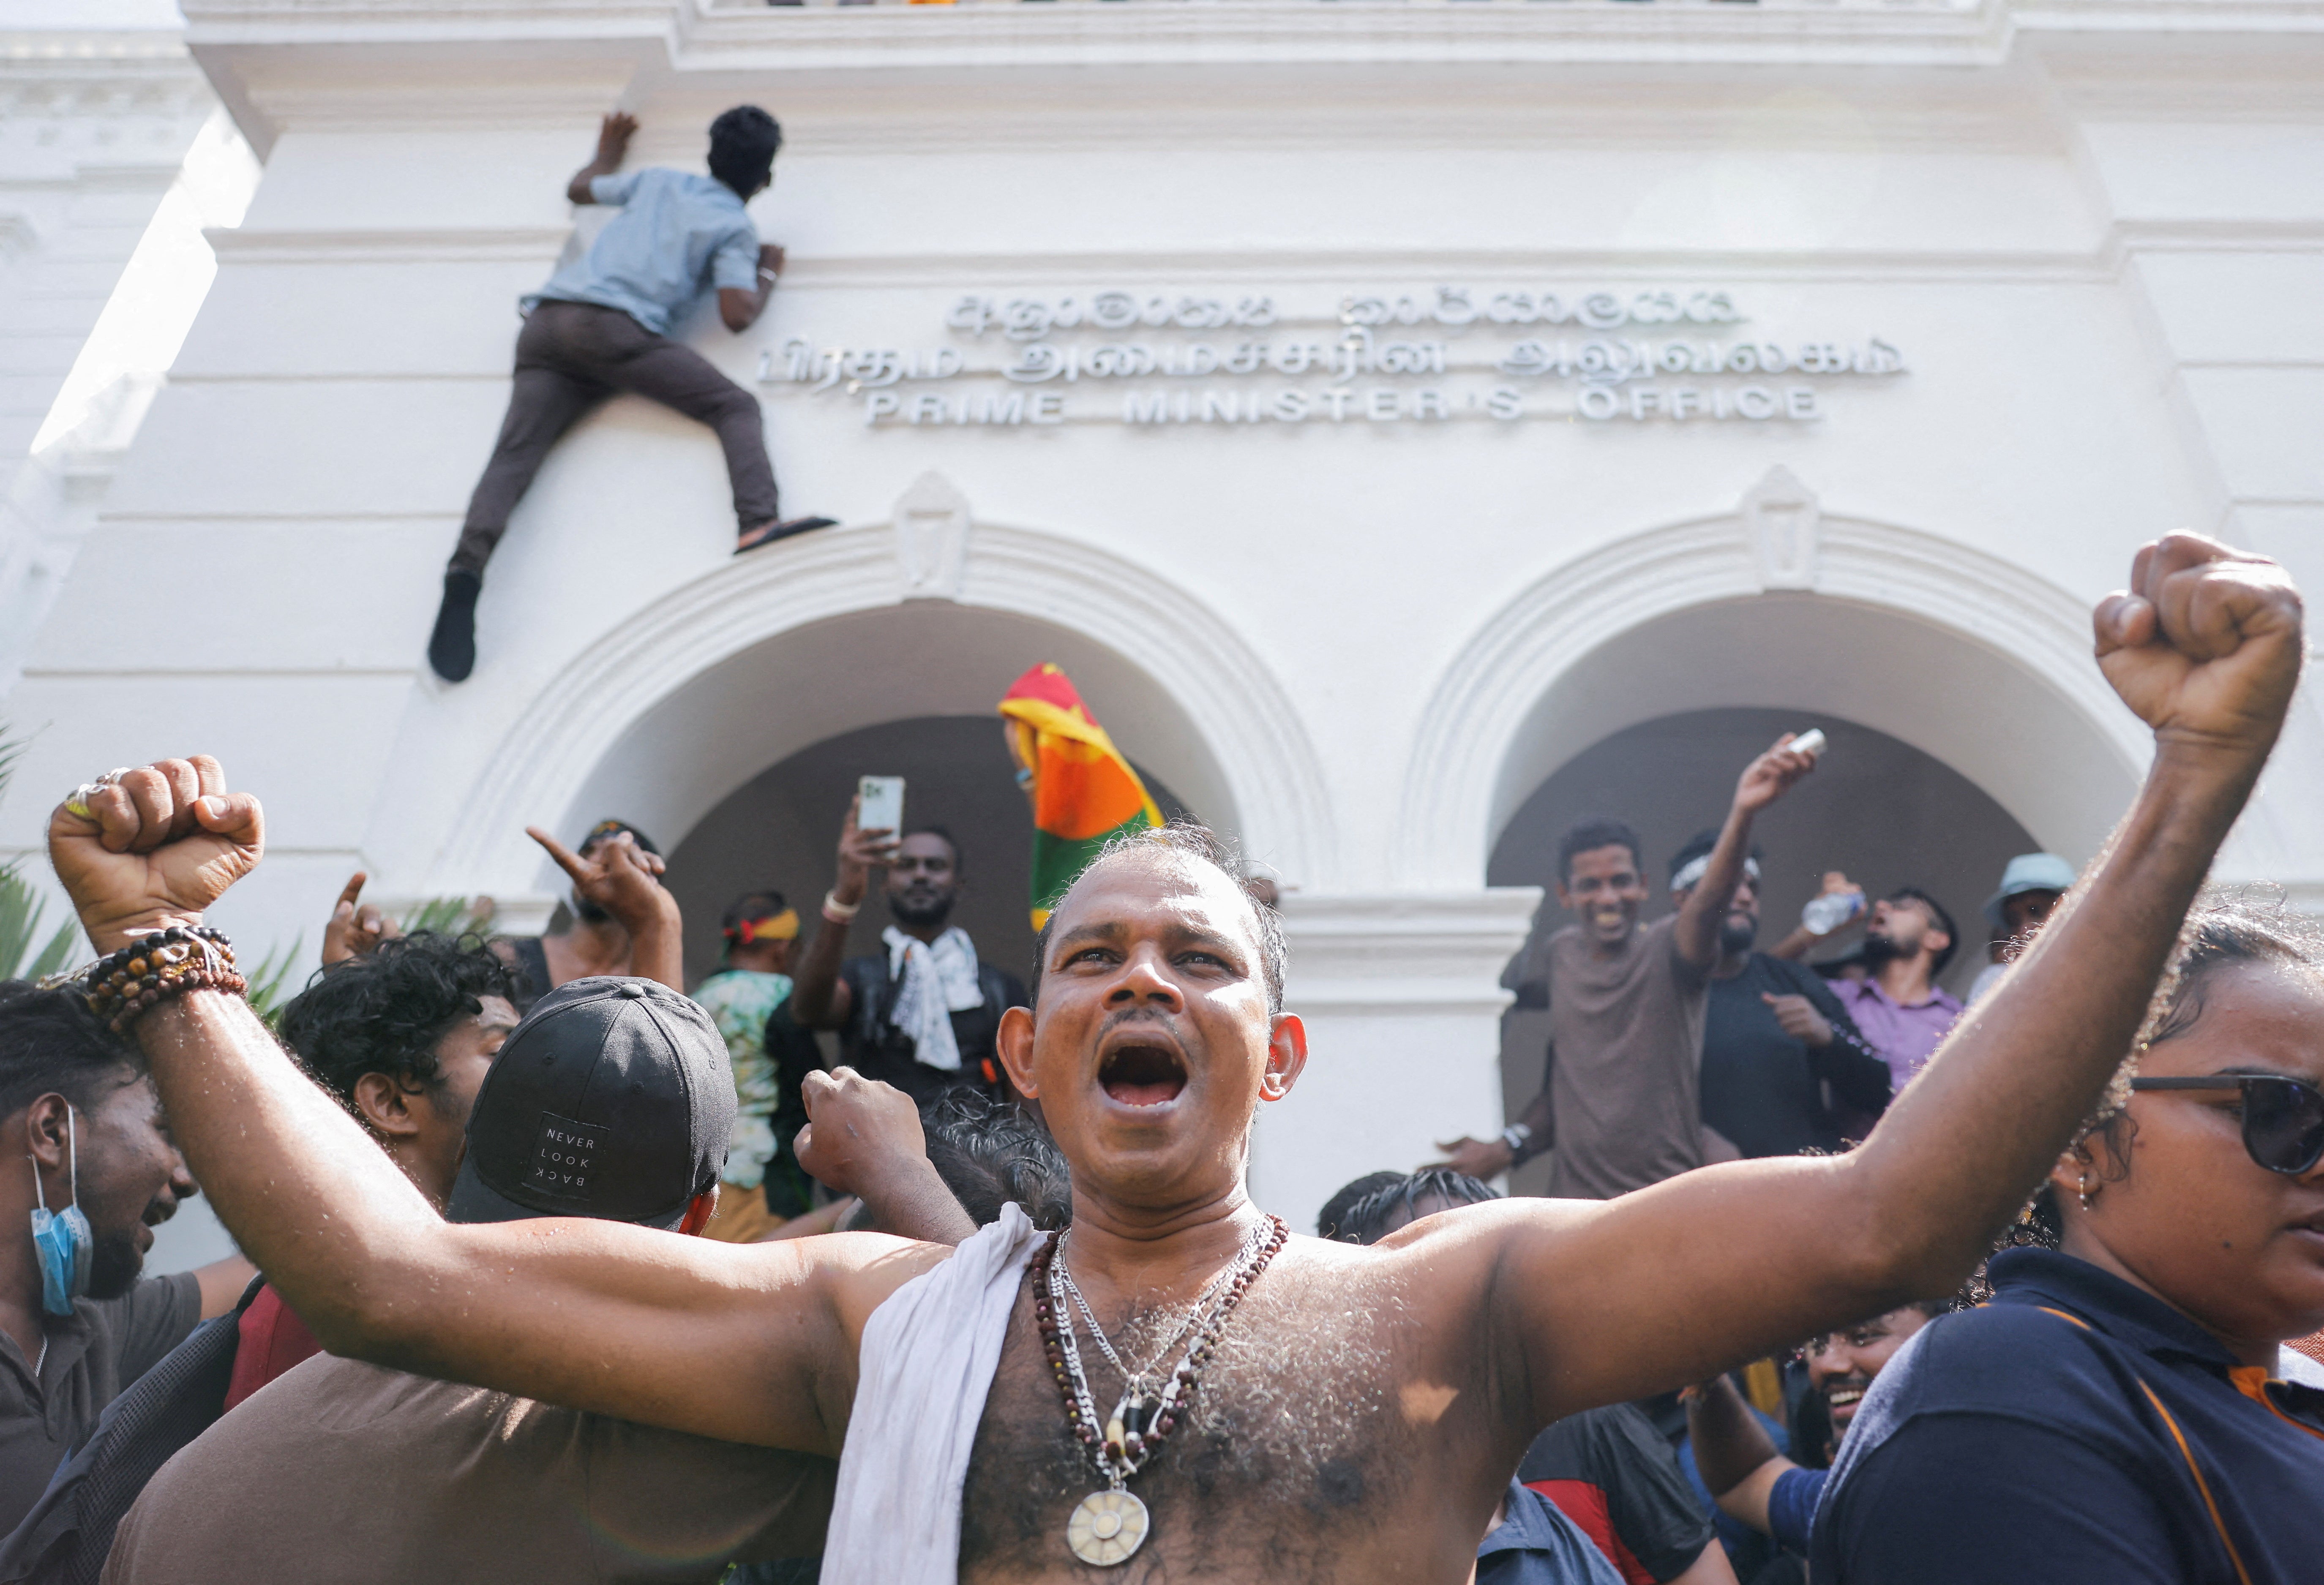 Demonstrators celebrate after they entered into Sri Lankan Prime Minister Ranil Wickremasinghe's office during a protest demanding for his resignation